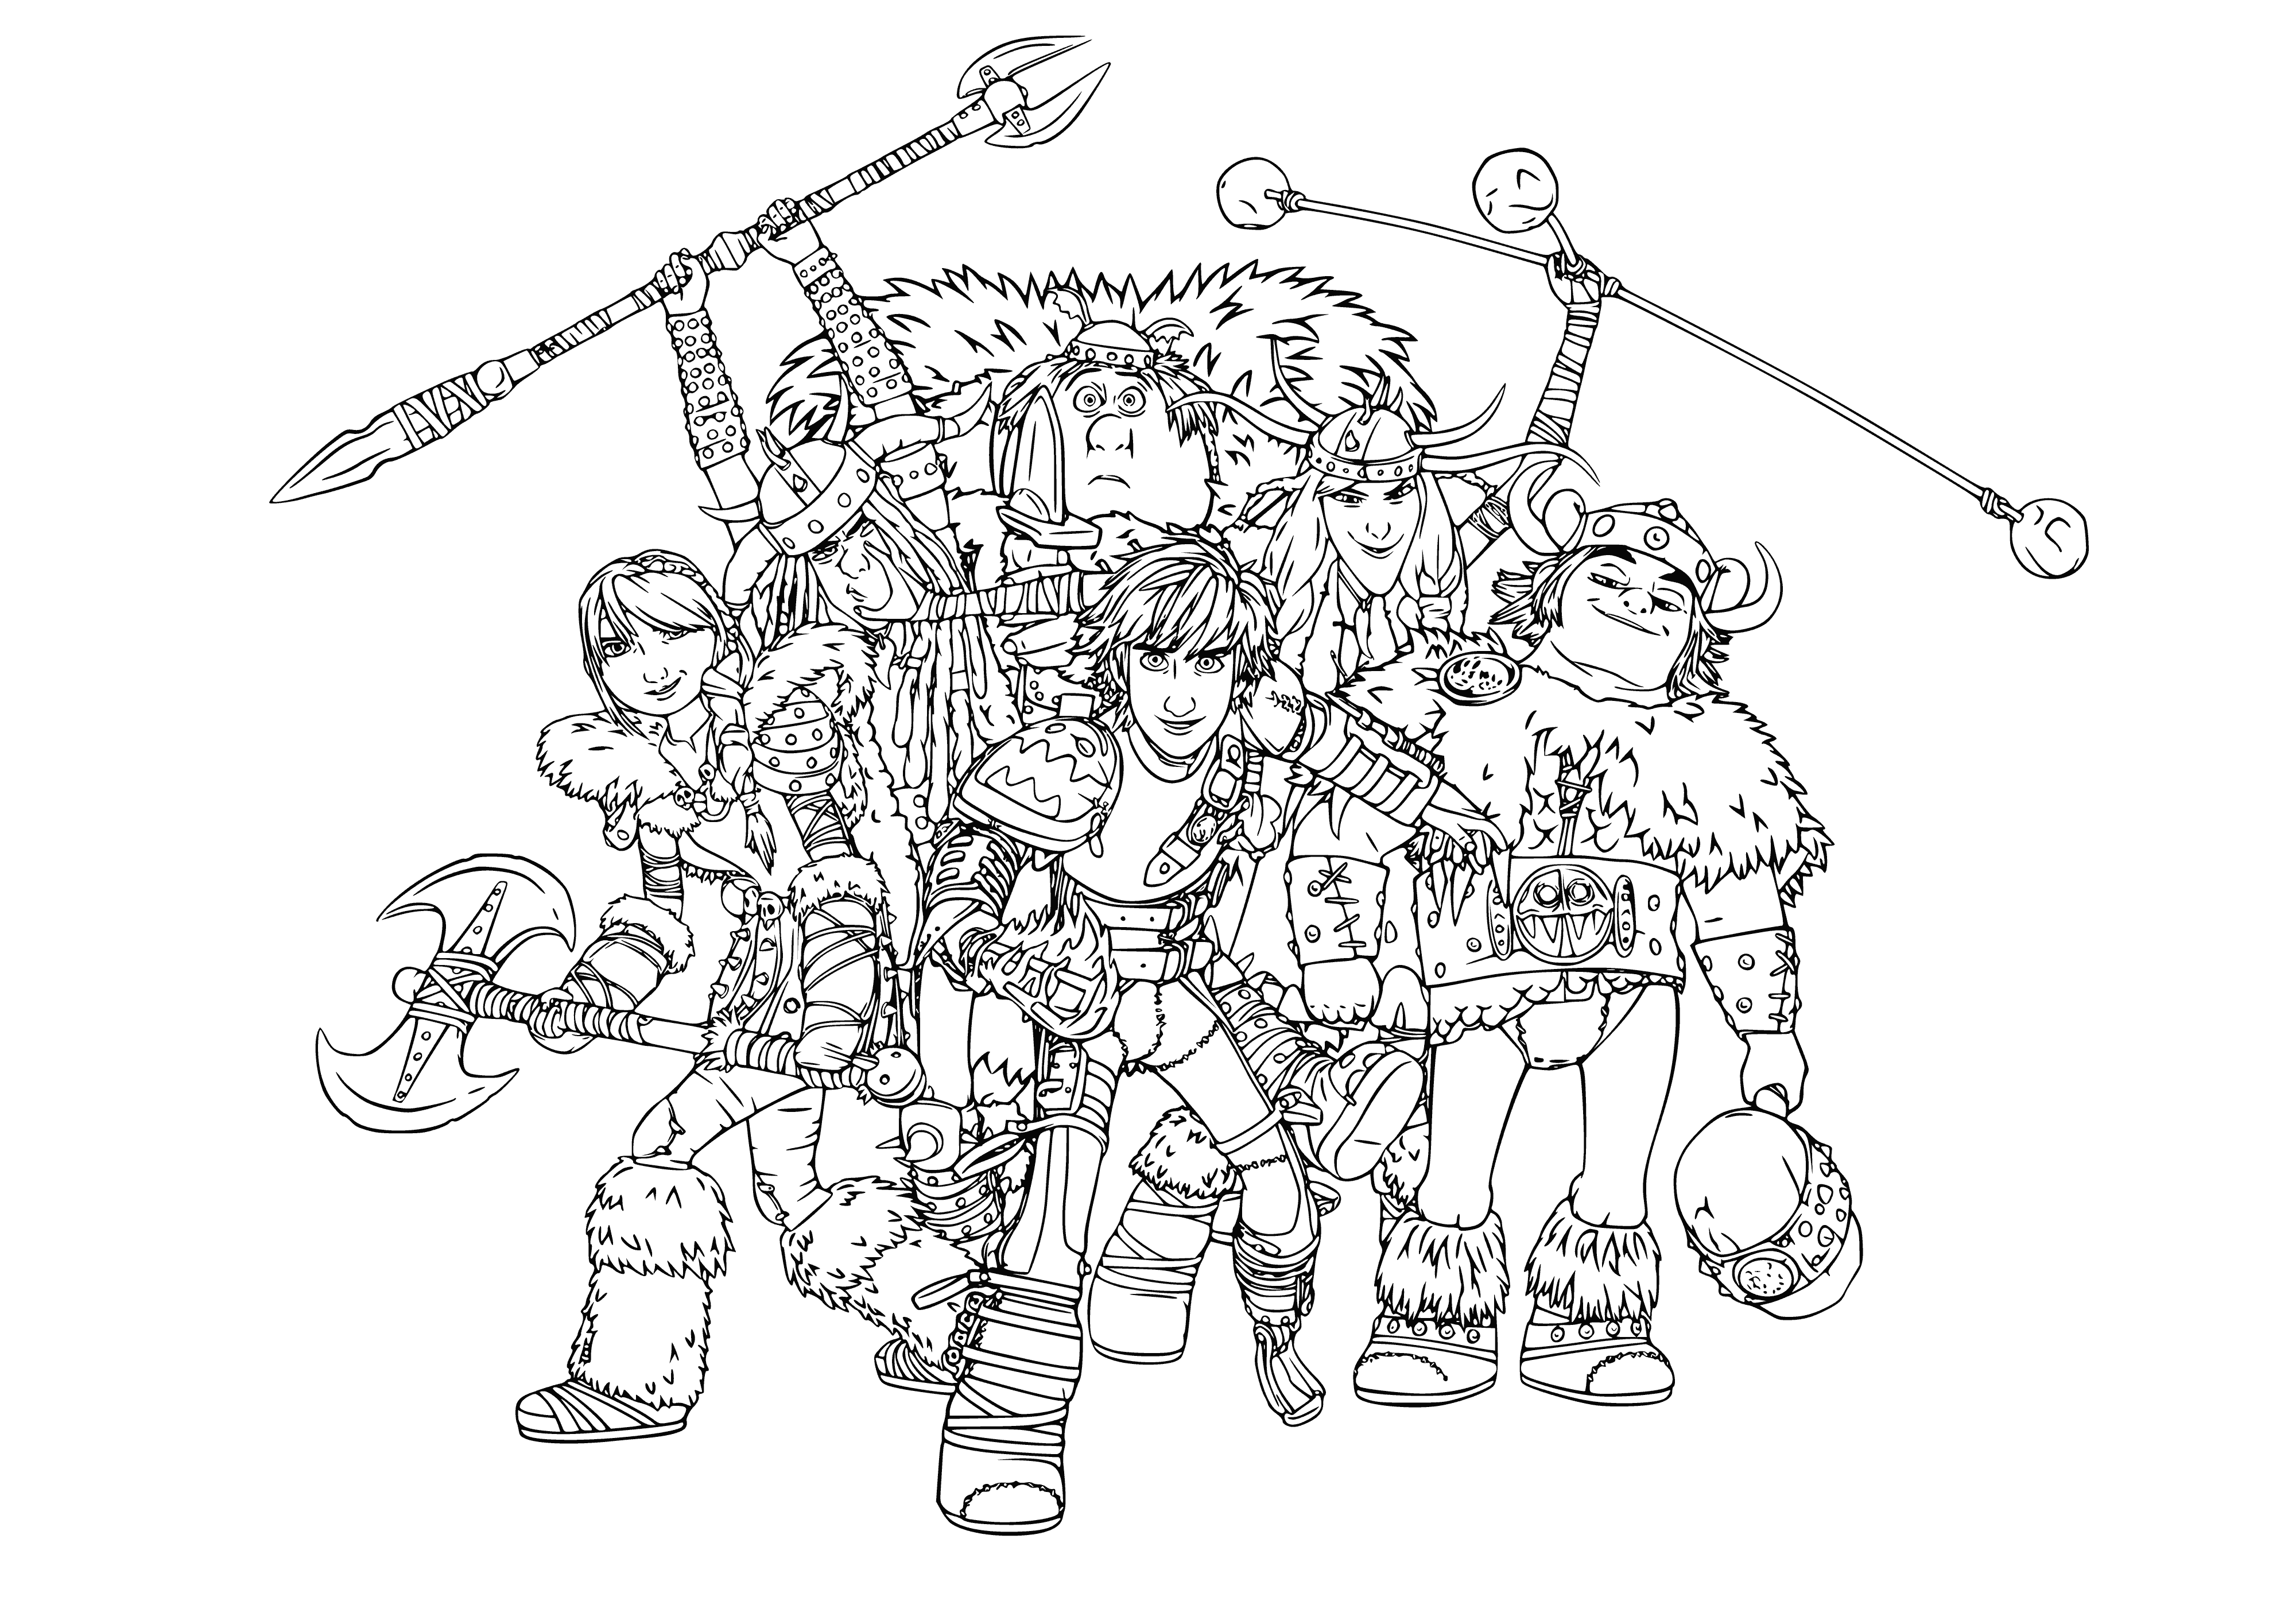 coloring page: Young people face massive fire-breathing dragon with weapons ready. Boy holds stick, girl has bow, other with spear, and boy with shield.